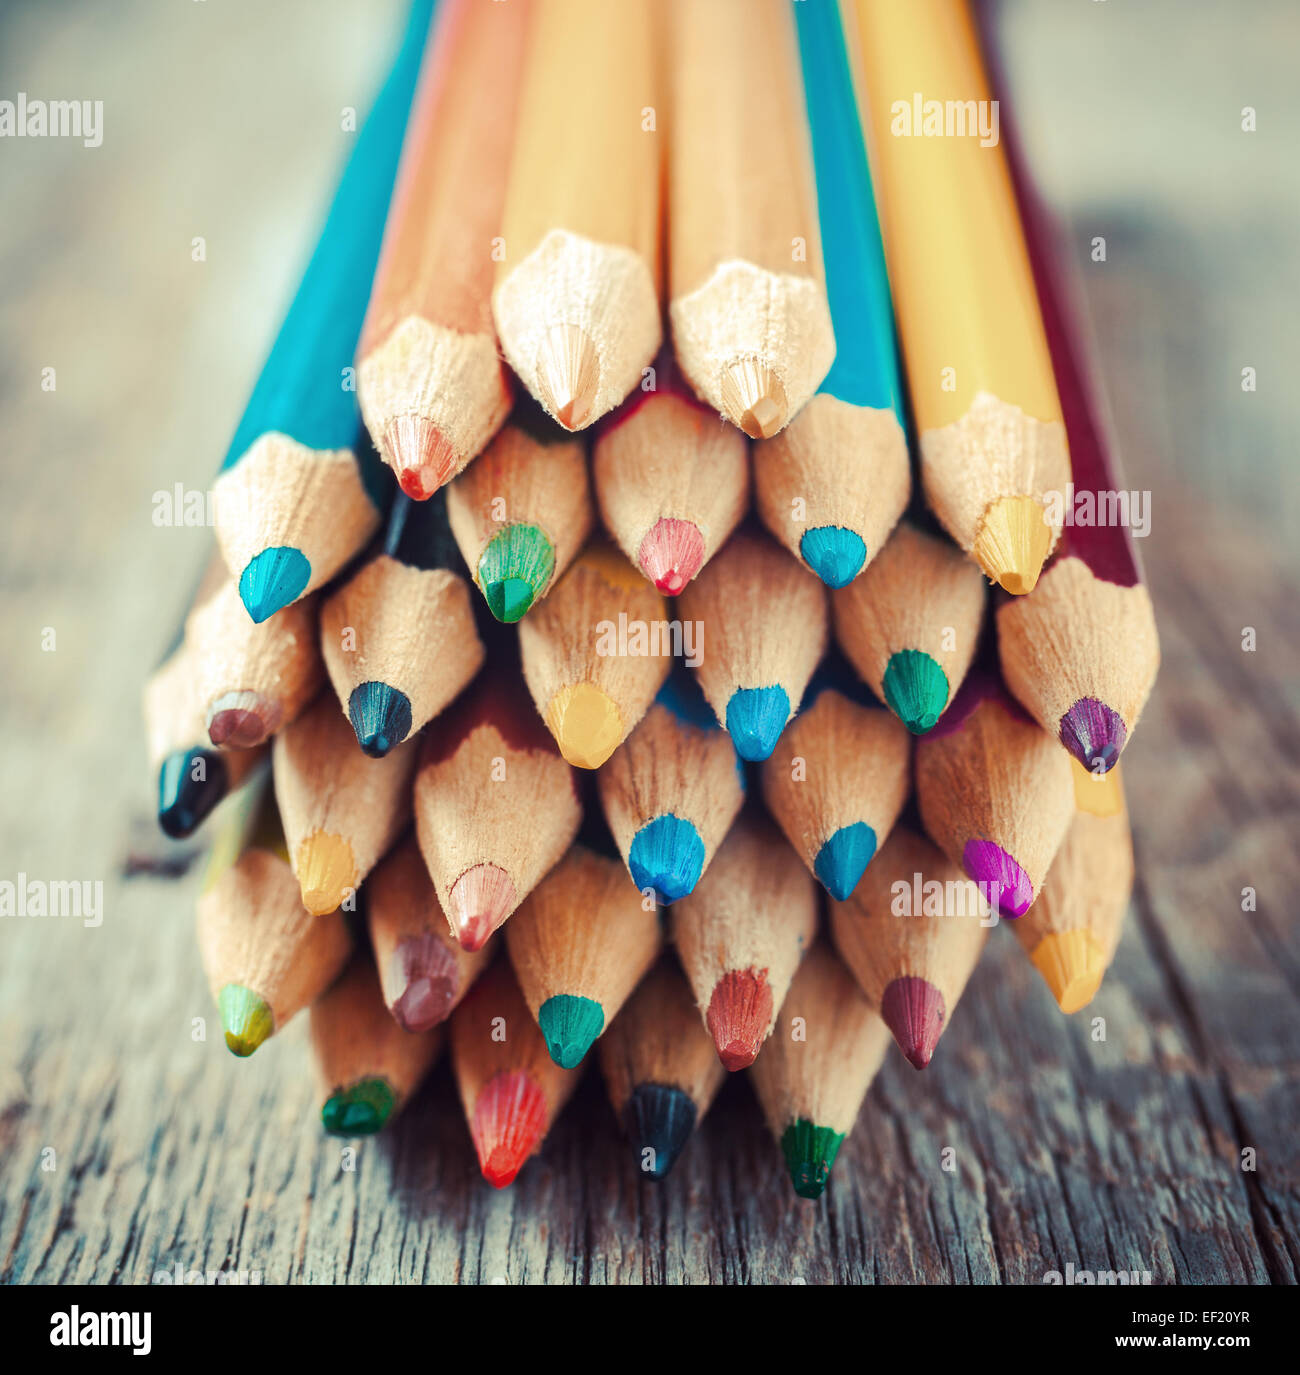 Colored drawing pencils closeup on old desk. Vintage stylized image. Stock Photo